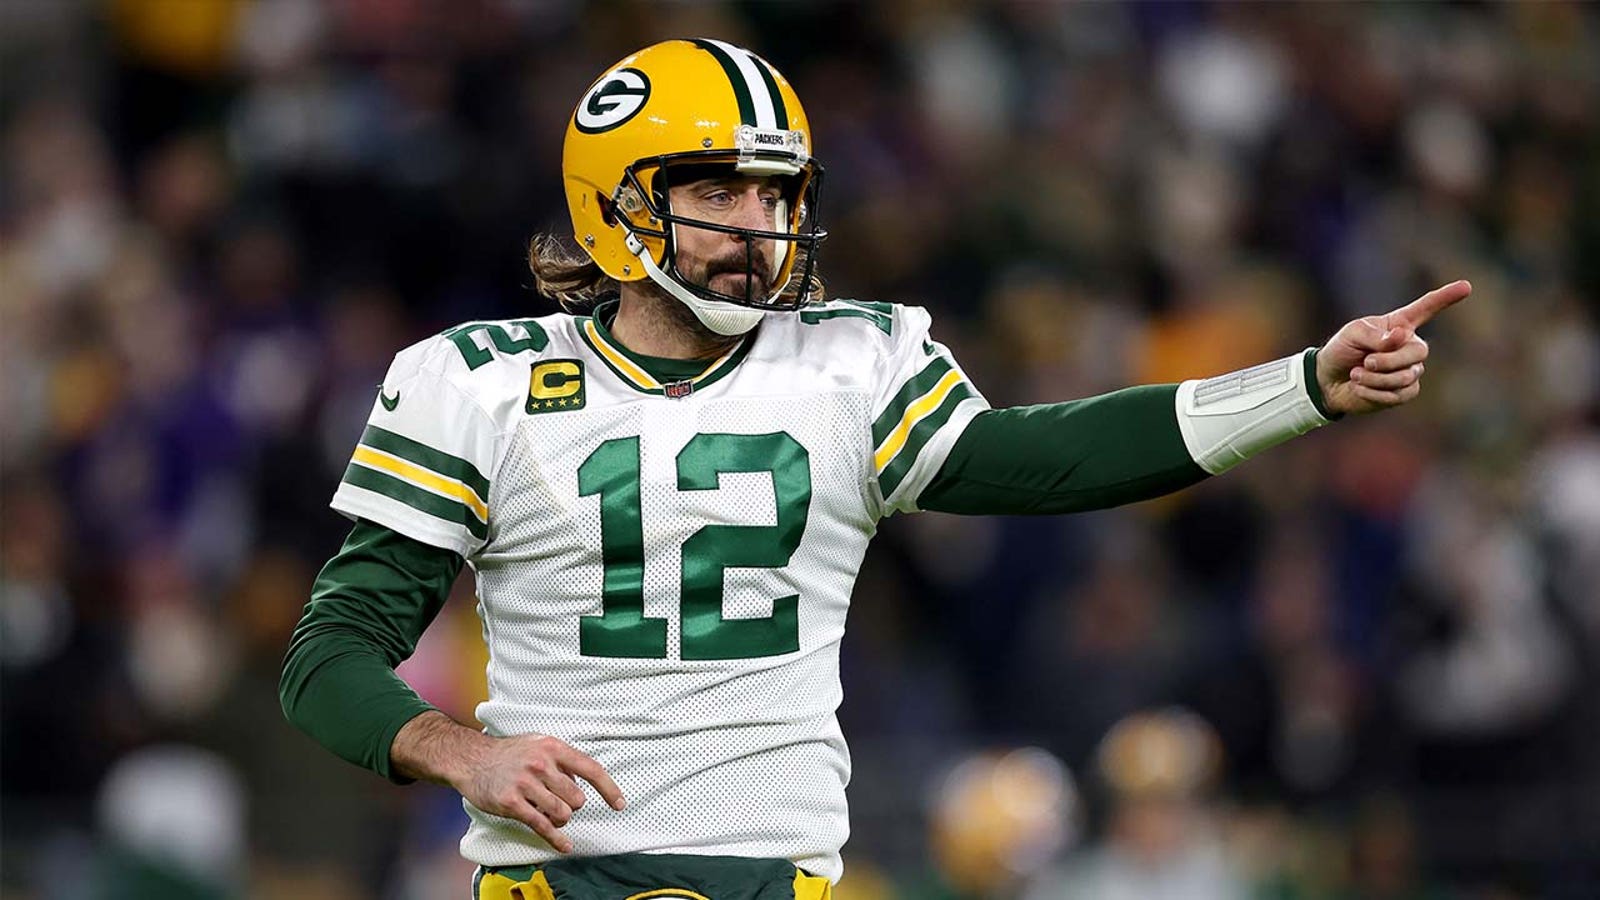 Aaron Rodgers equals Brett Favre's TD record as a Packer